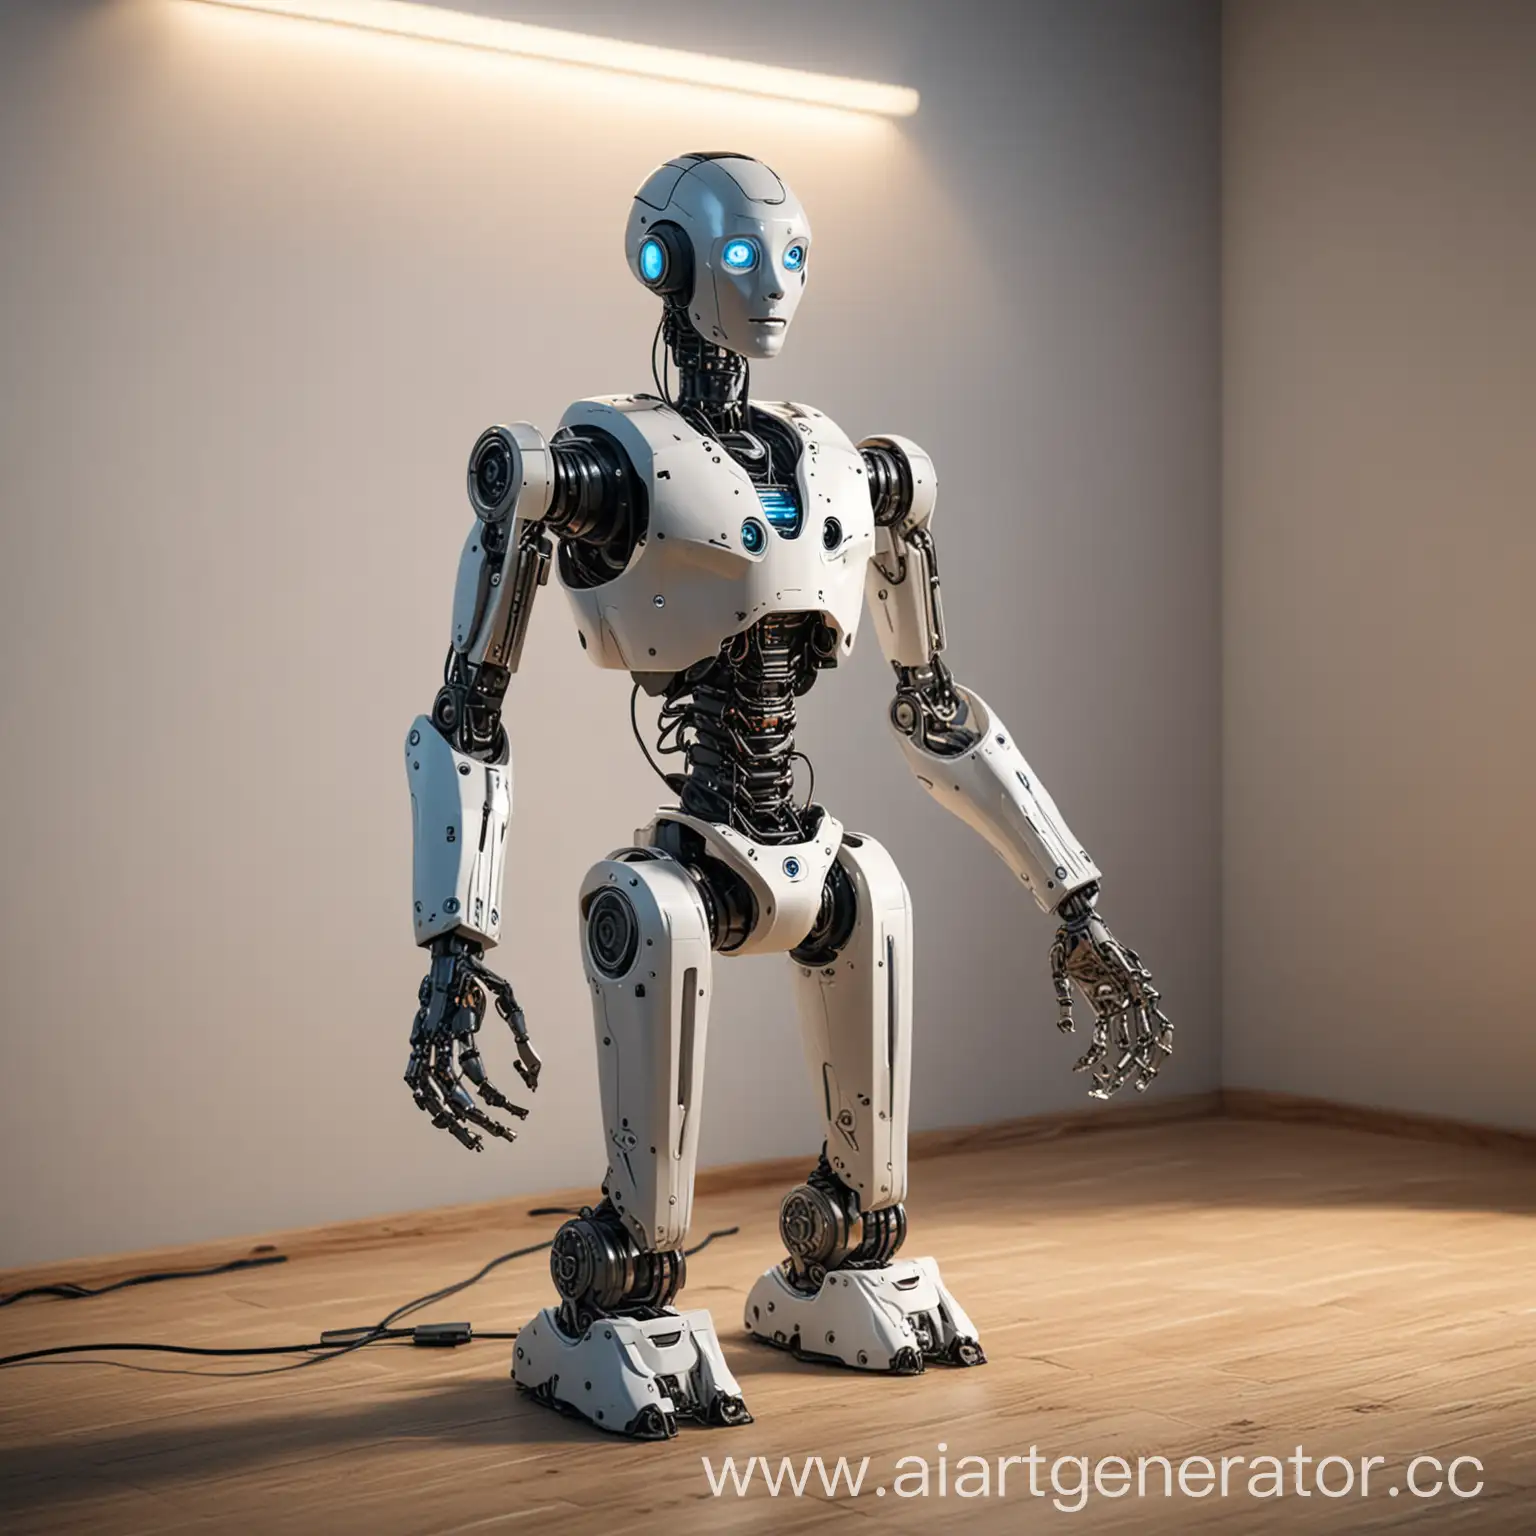 Futuristic-Household-Robot-Assistant-with-Interchangeable-Manipulator-Arms-in-Room-Lighting